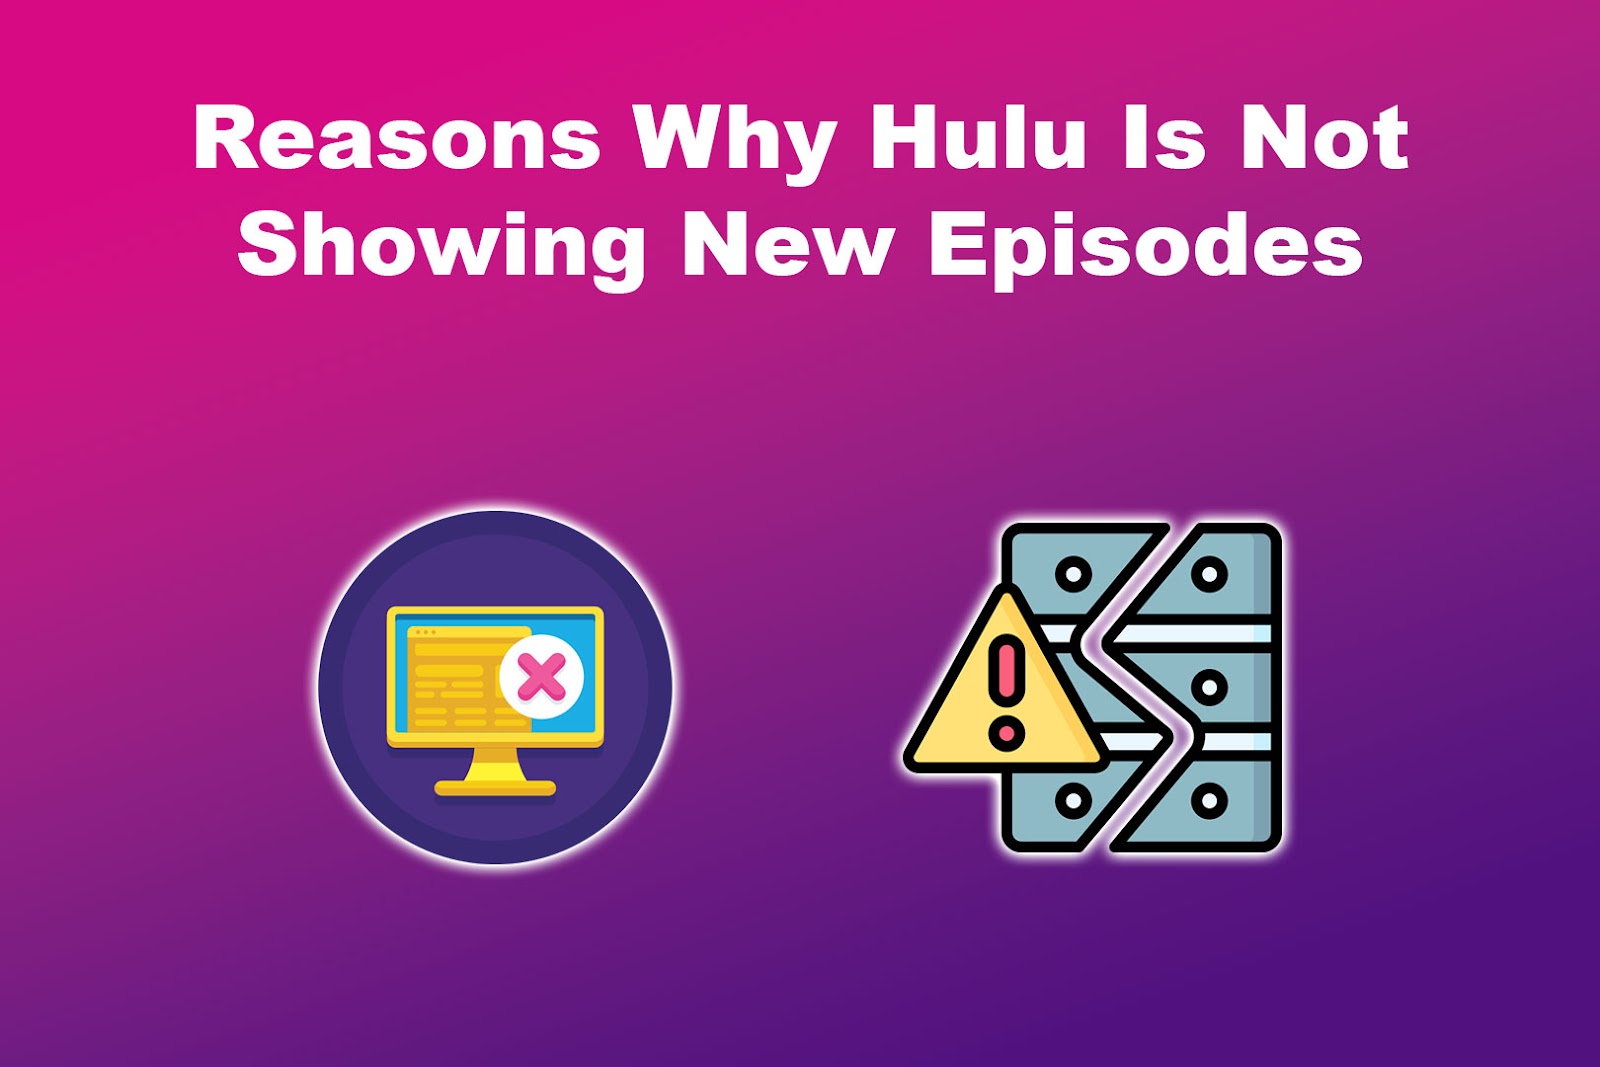 Reasons Why Hulu Is Not Showing New Episodes